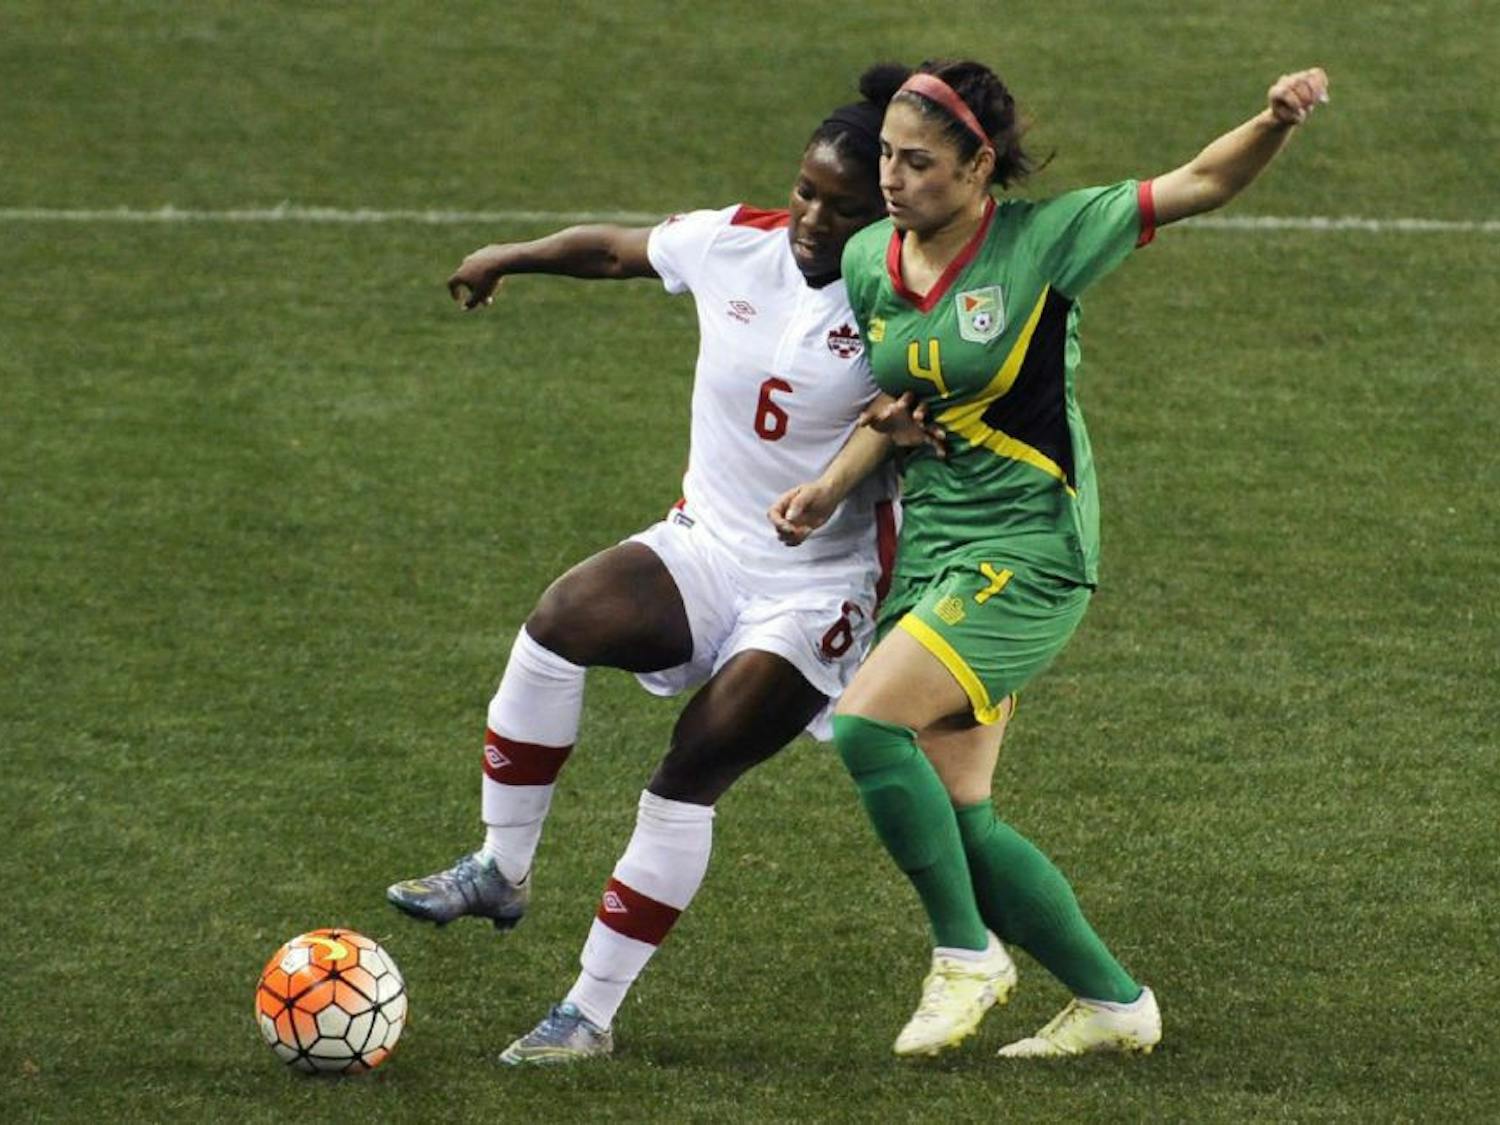 Canada's Deanne Rose, left, fends off Guyana's Kayle De Souza during Olympic qualifying action Thursday. Rose scored two goals in a breakout performance. (PAT SULLIVAN / THE ASSOCIATED PRESS)